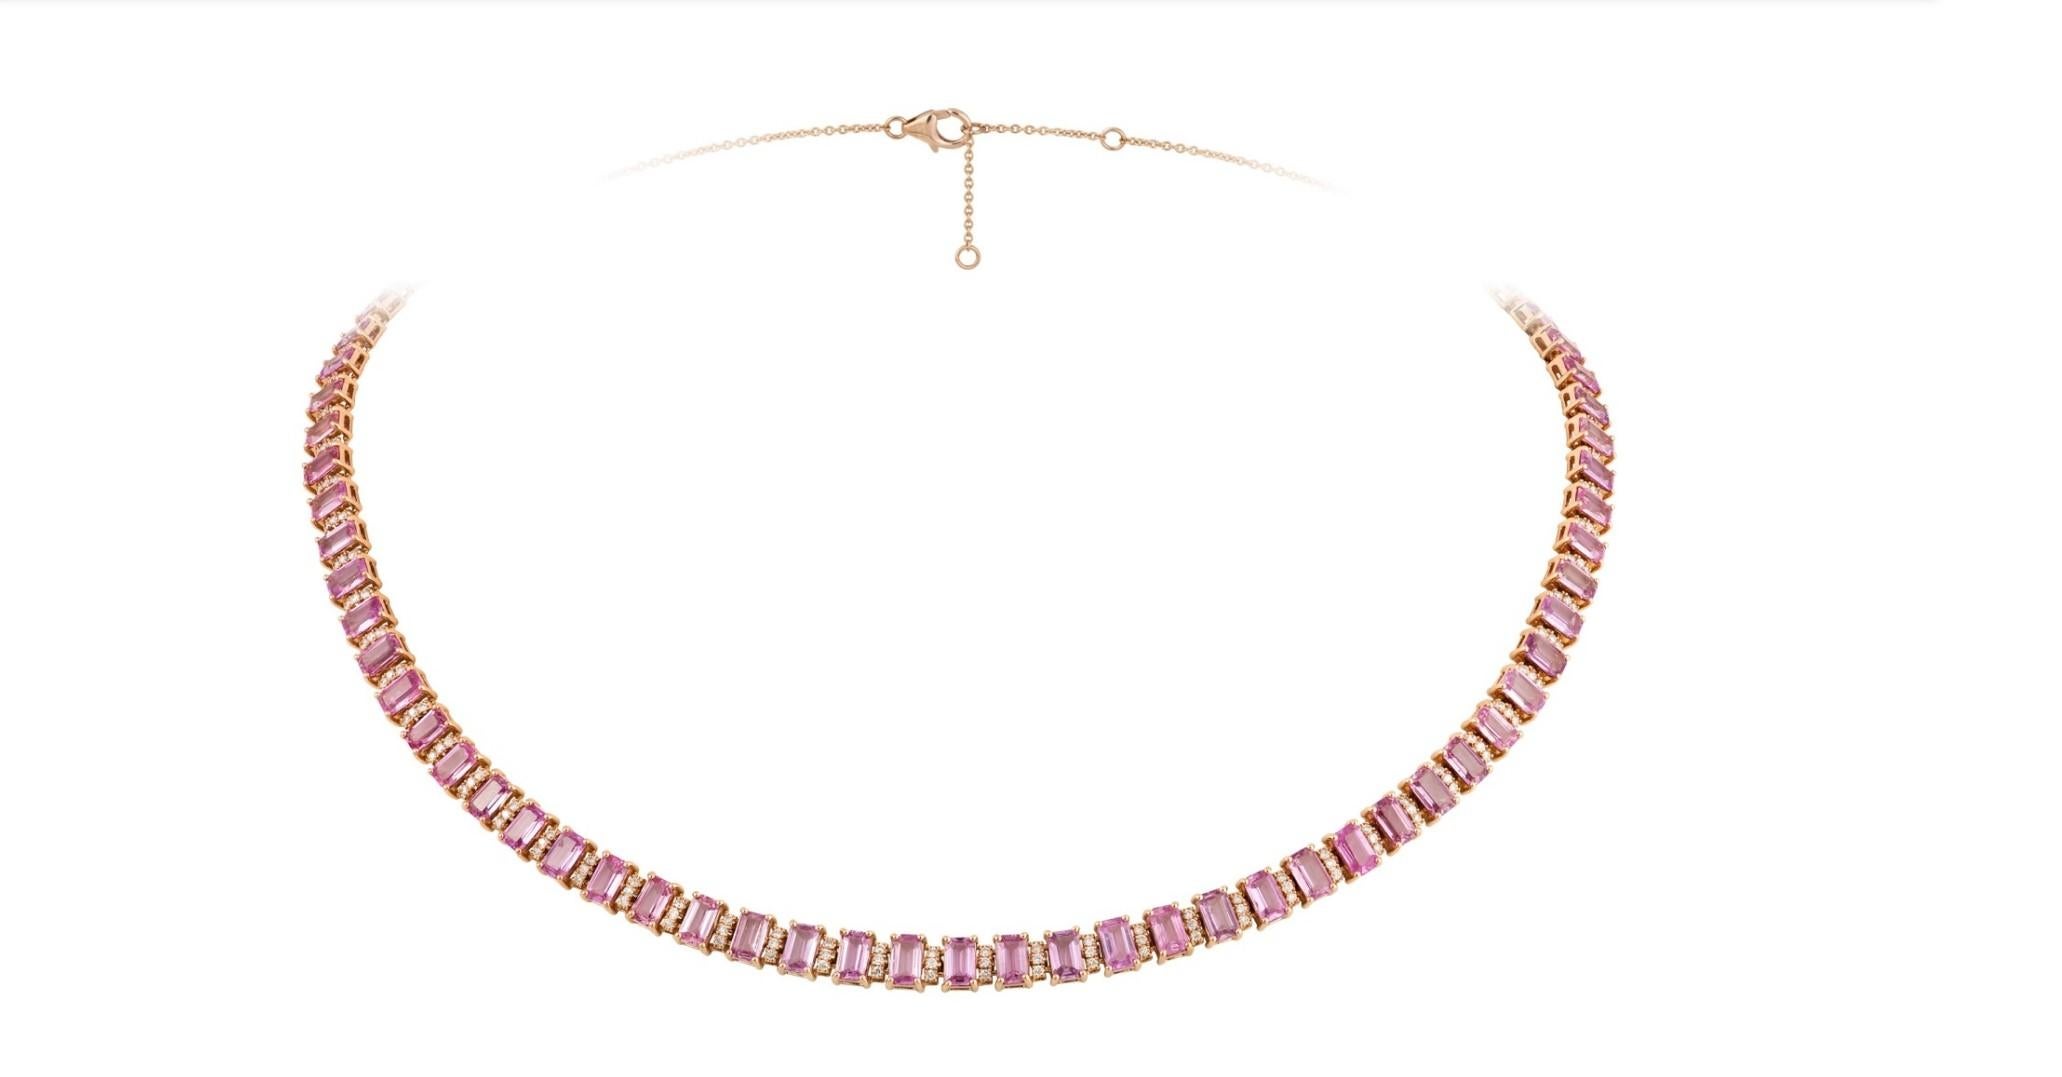 The Following Item we are offering is this Rare Important Radiant 18KT Gold Gorgeous Glittering and Sparkling Magnificent Fancy Emerald Cut Pink Sapphire and Diamond Necklace. Necklace contains approx 16.50CTS of Beautiful Fancy Emerald Cut Pink